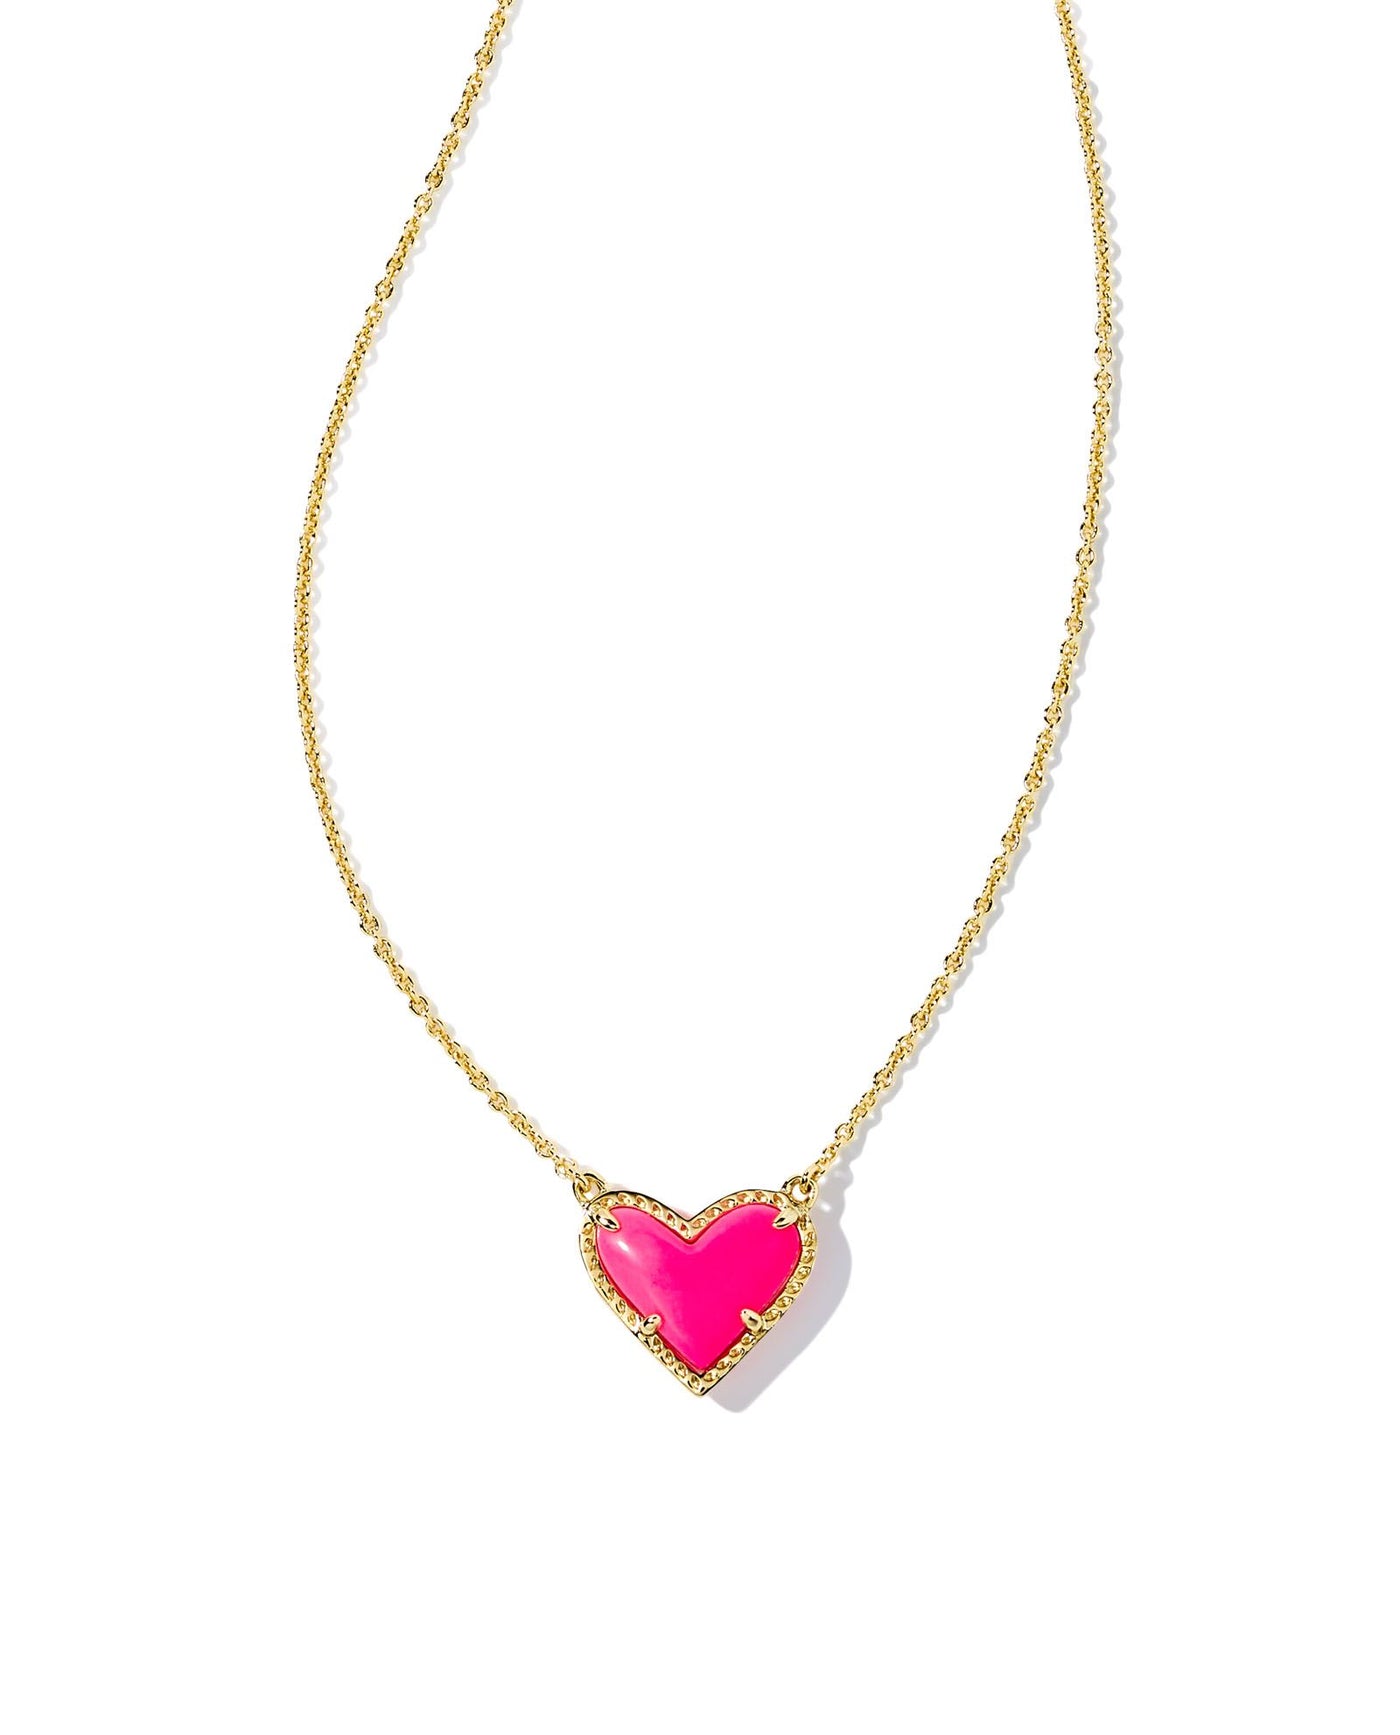 Kendra Scott Ari Heart Pendant Necklace in Gold Neon Pink-Necklaces-Kendra Scott-Market Street Nest, Fashionable Clothing, Shoes and Home Décor Located in Mabank, TX